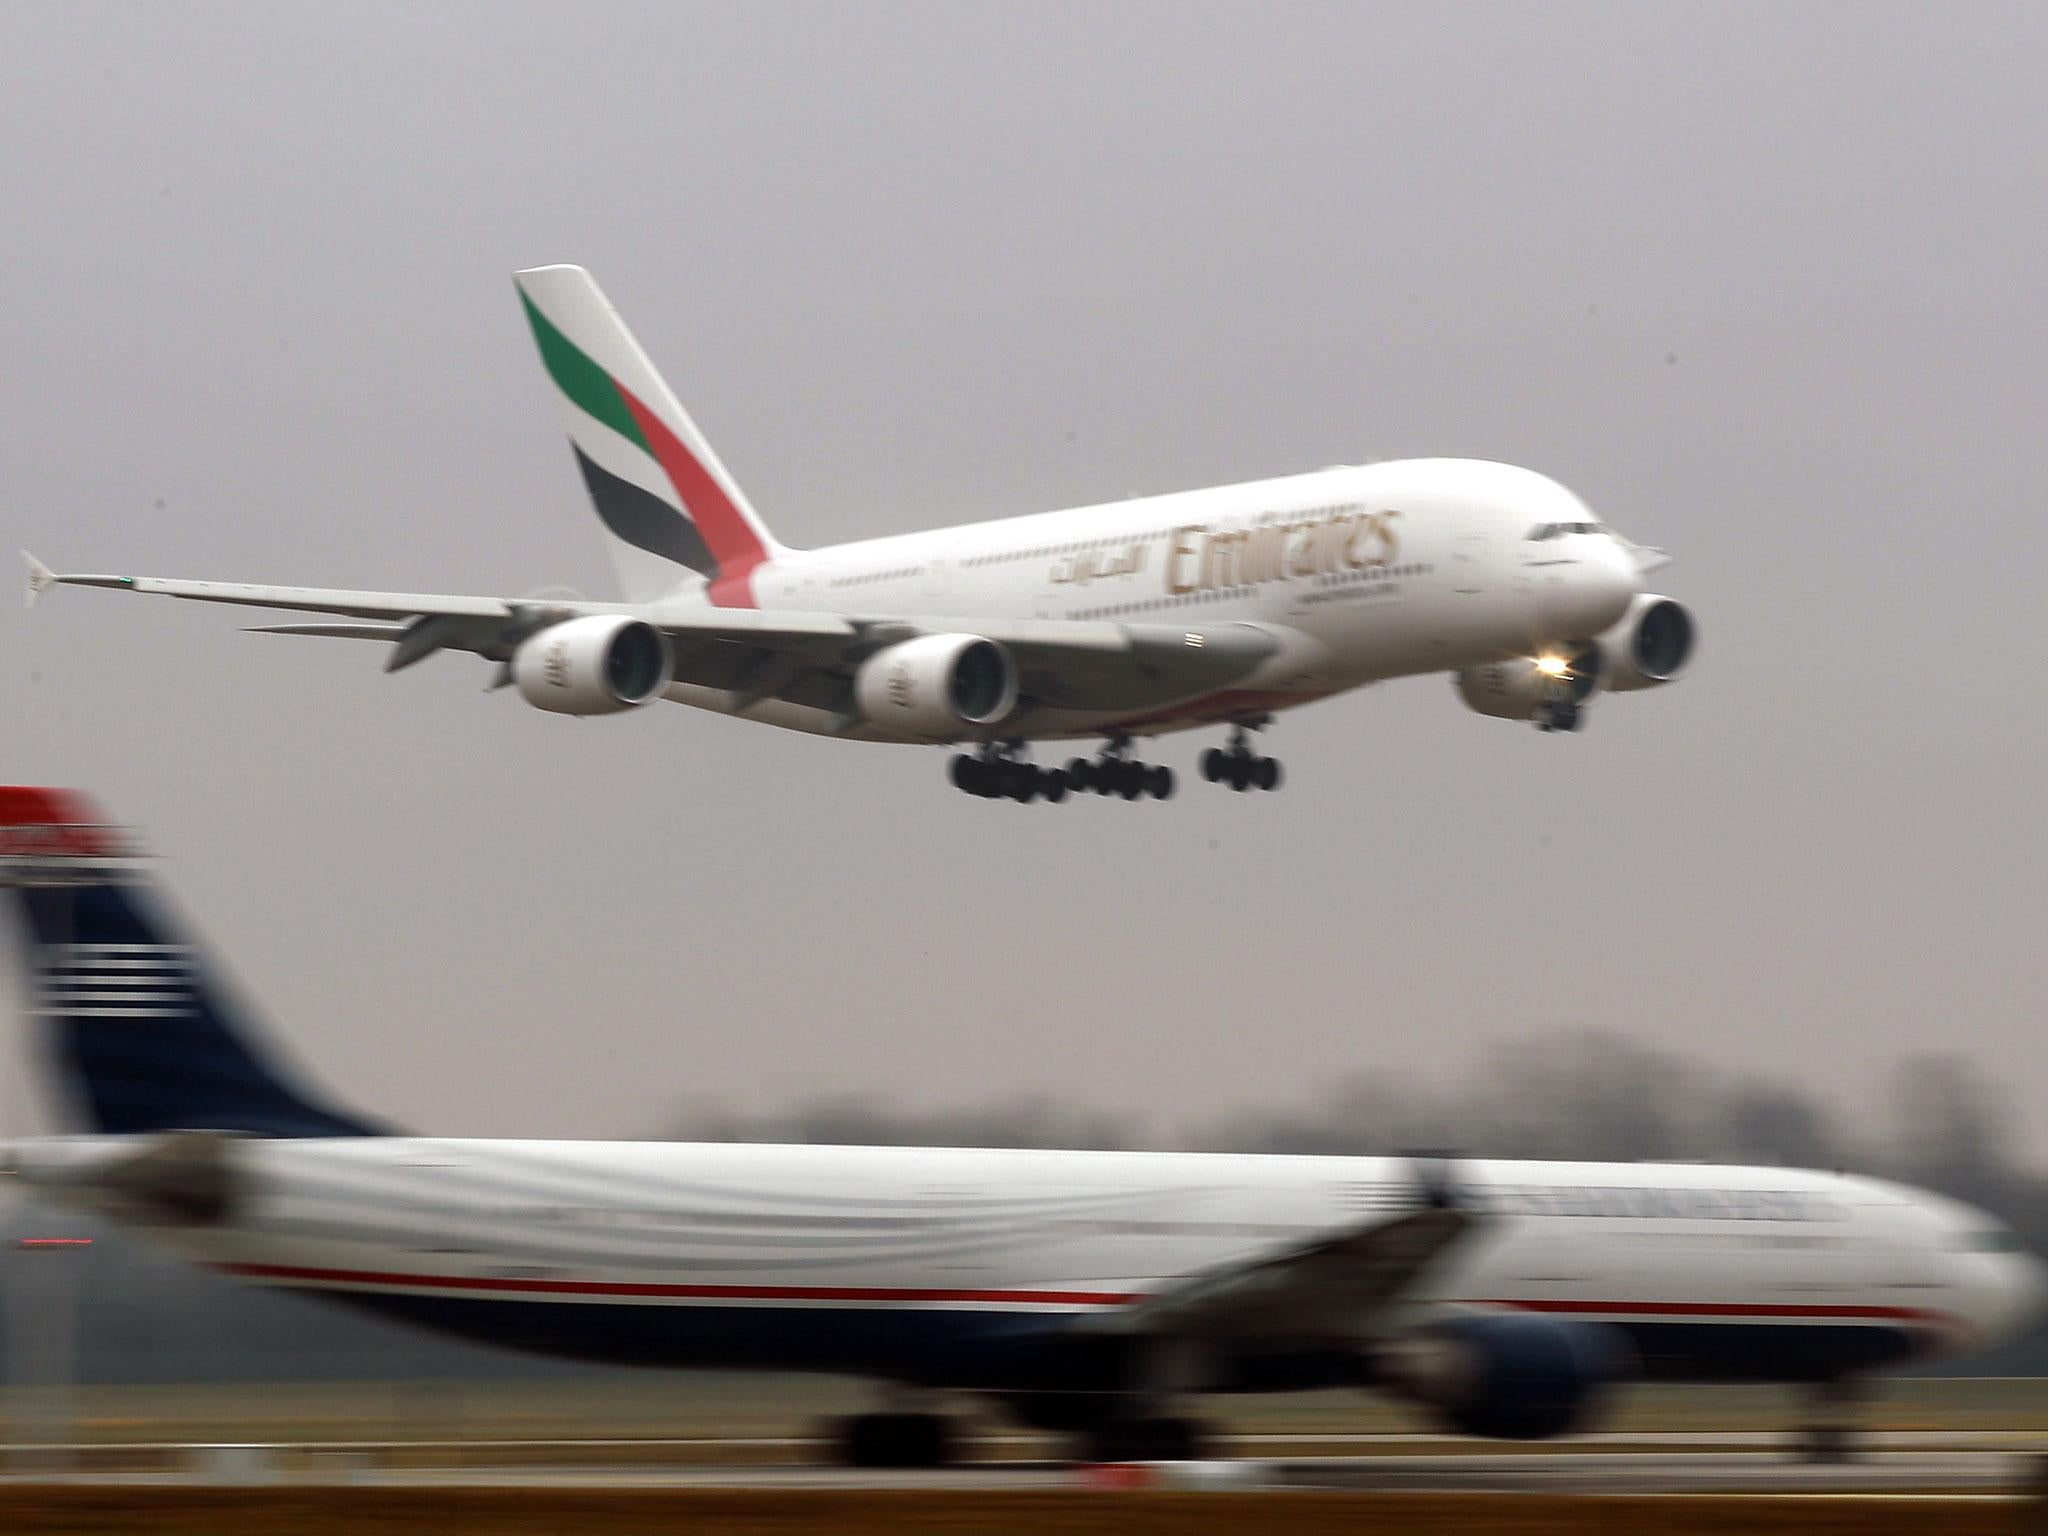 An Emirates flight was rocked by turbulence